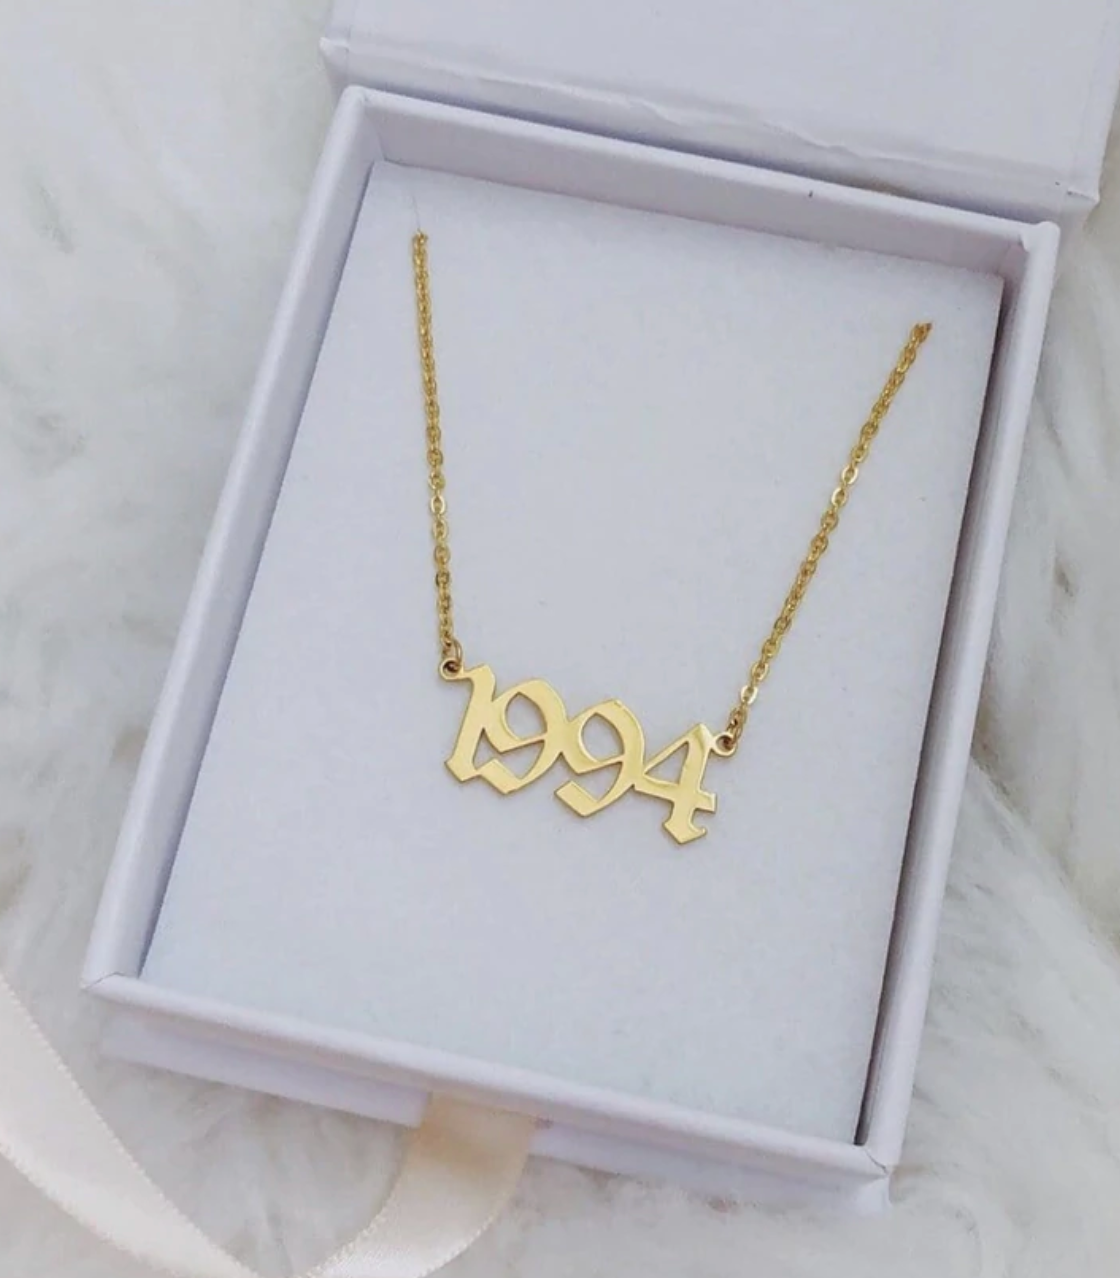 a gold 1994 necklace 